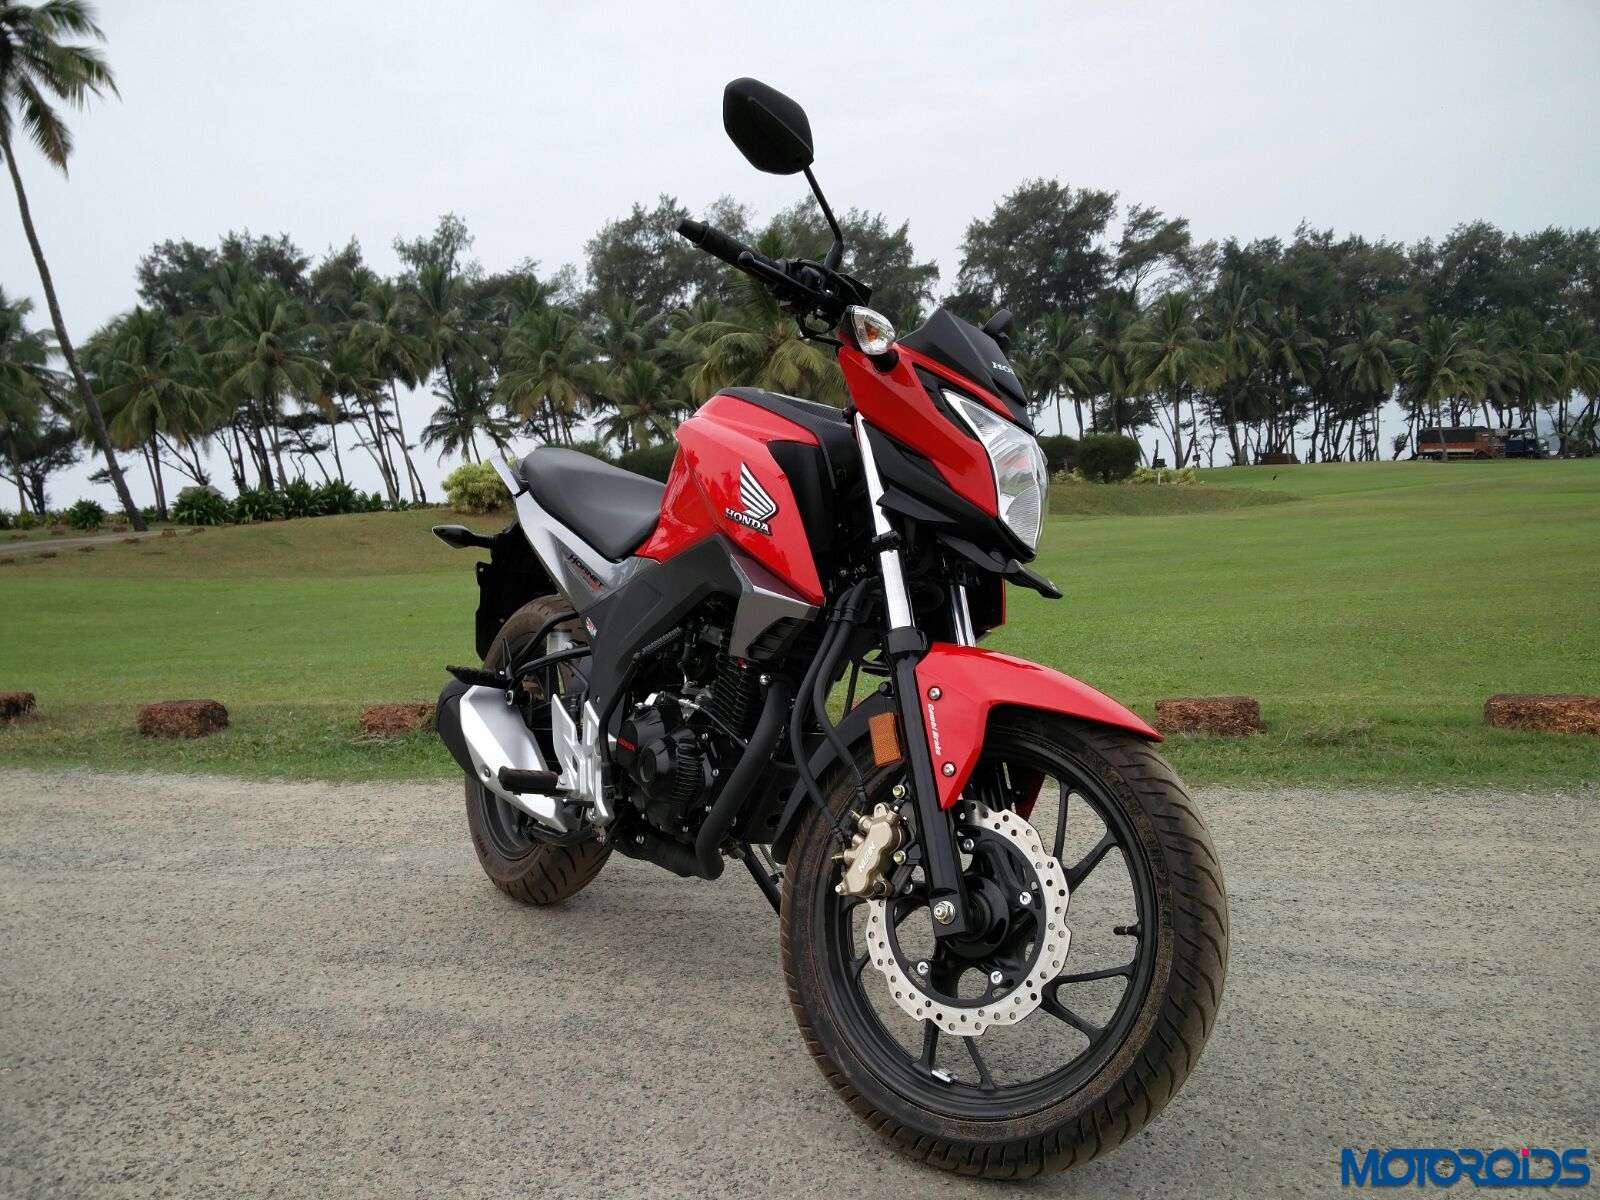 Honda CB Hornet 160R First Ride Review Images Specs And Details